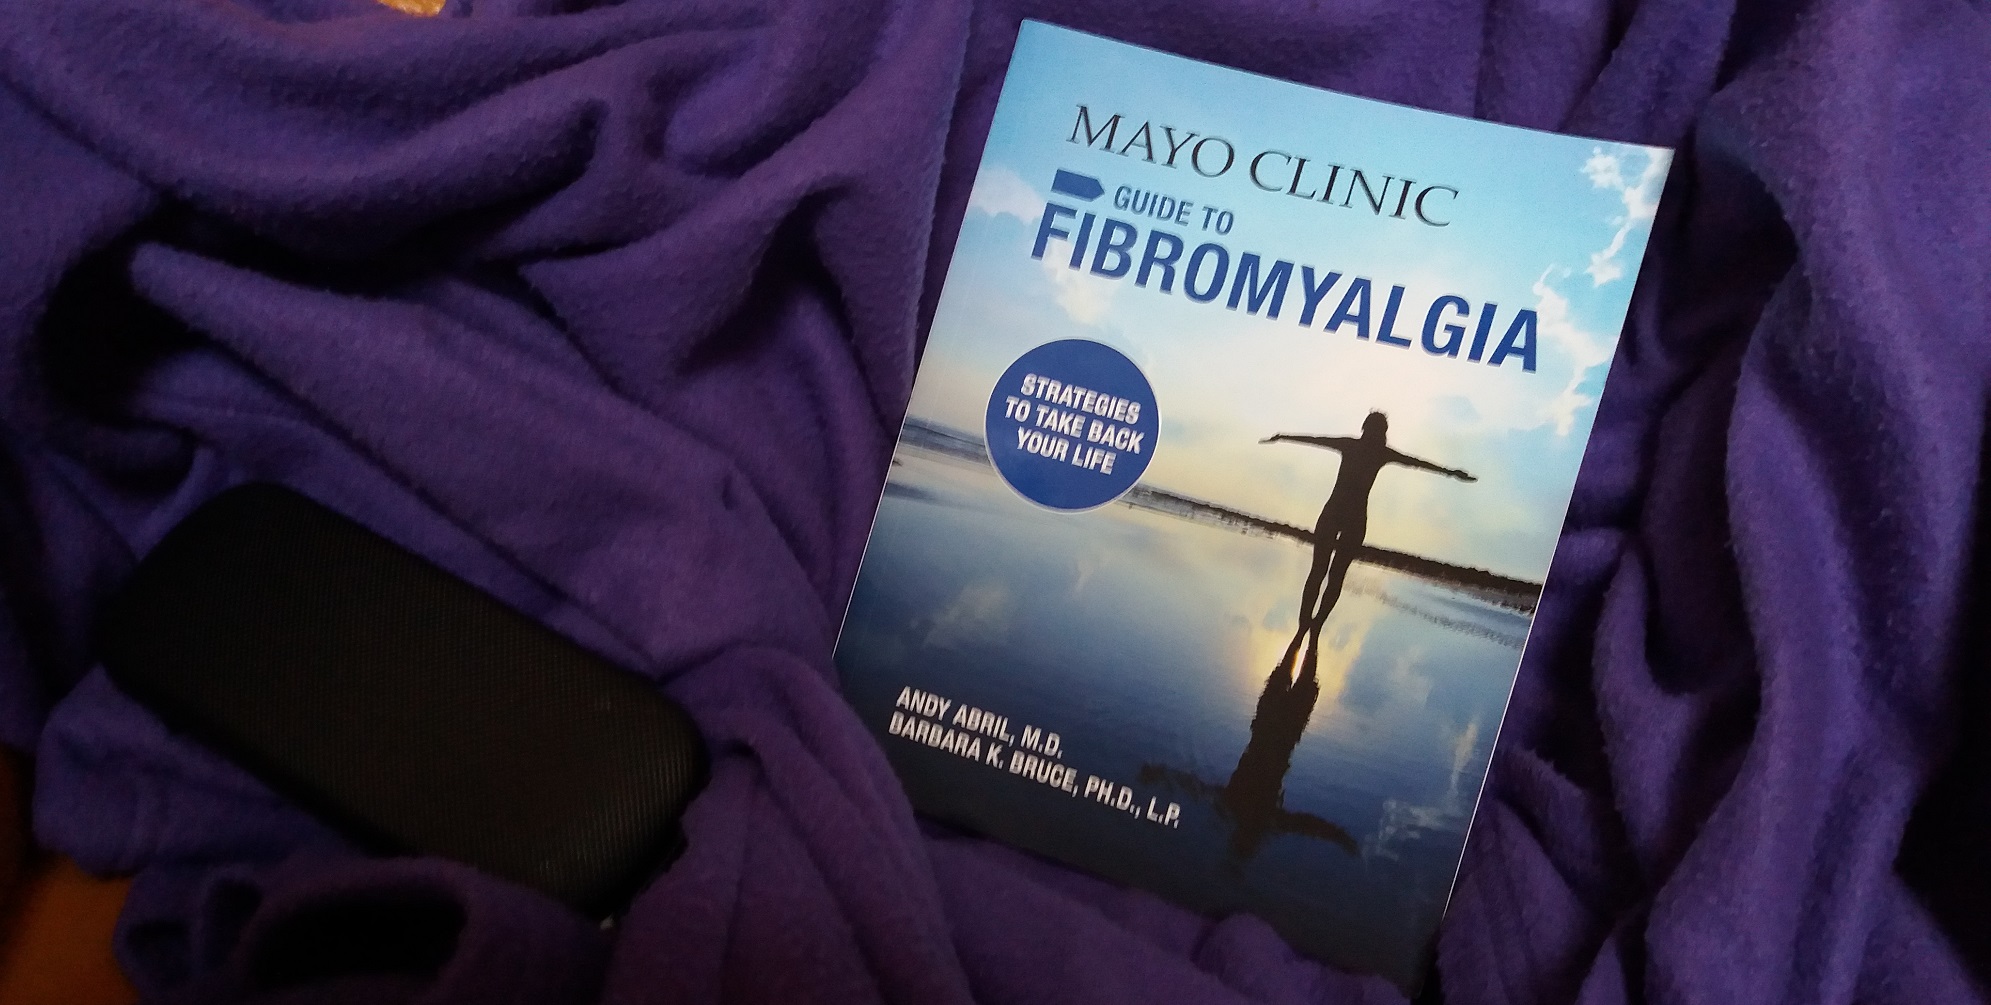 Mayo clinic guide to fibromyalgia on a blanket with glasses case